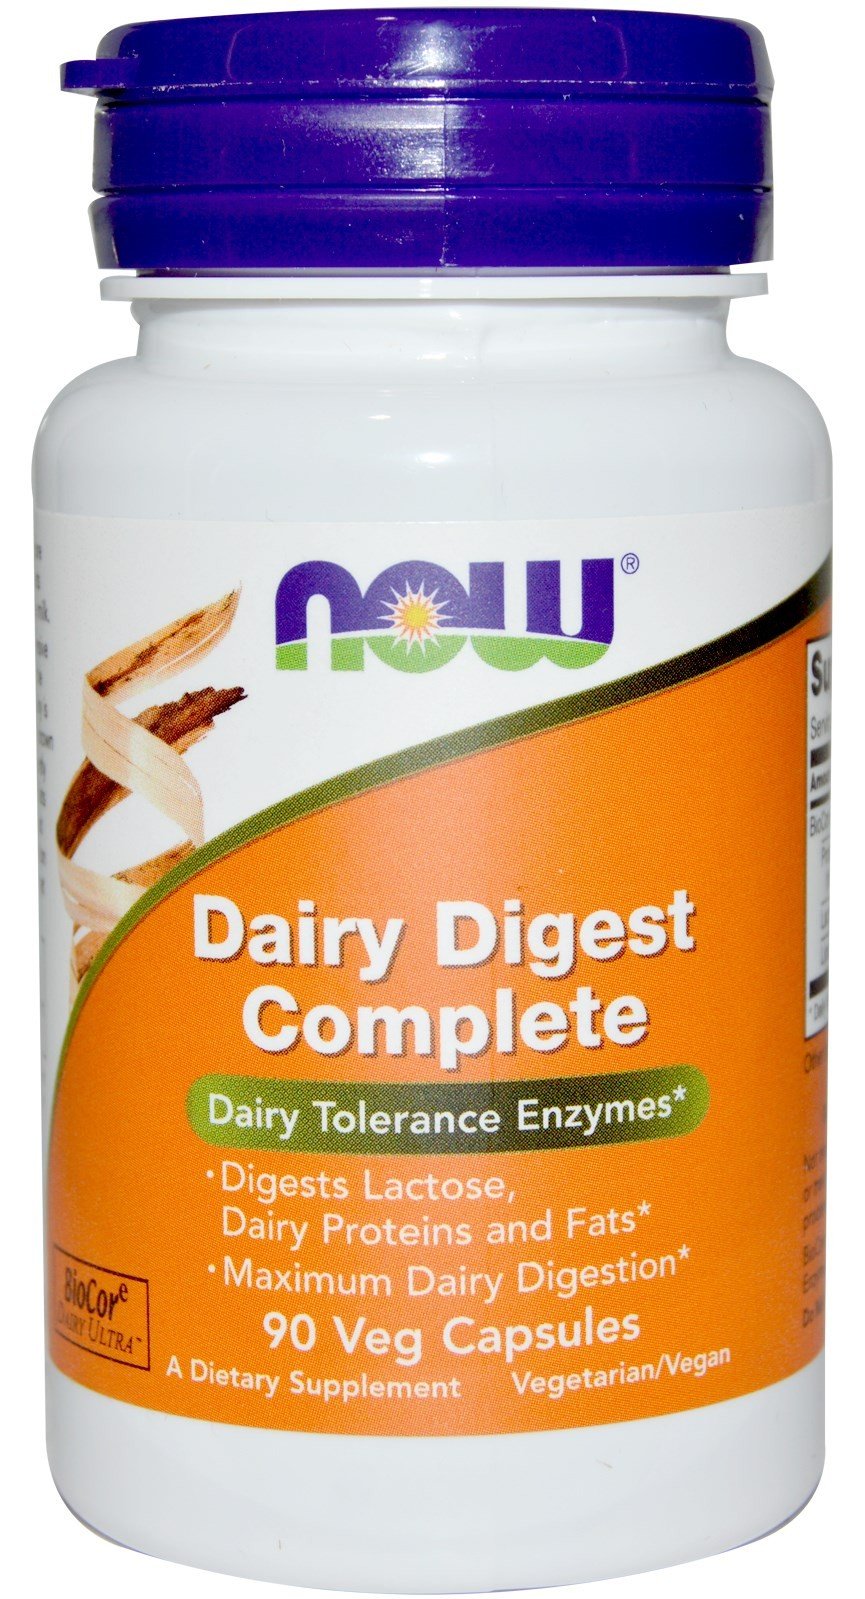 Dairy Digest Complete, 90 pcs, Now. Special supplements. 